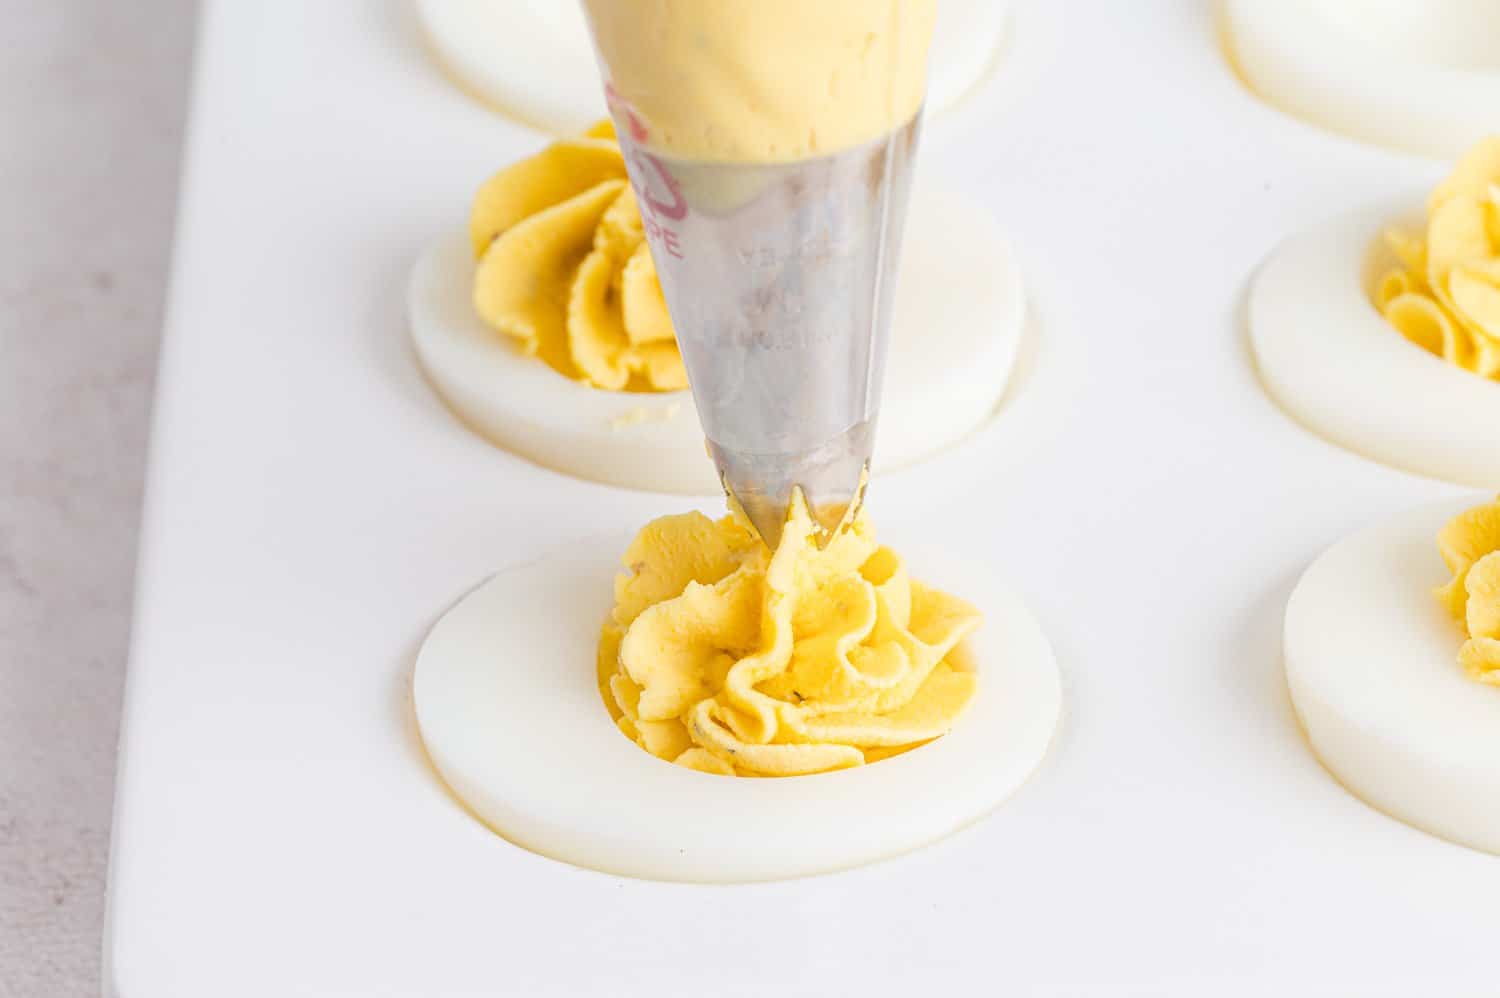 Deviled eggs being filled with a piping bag.